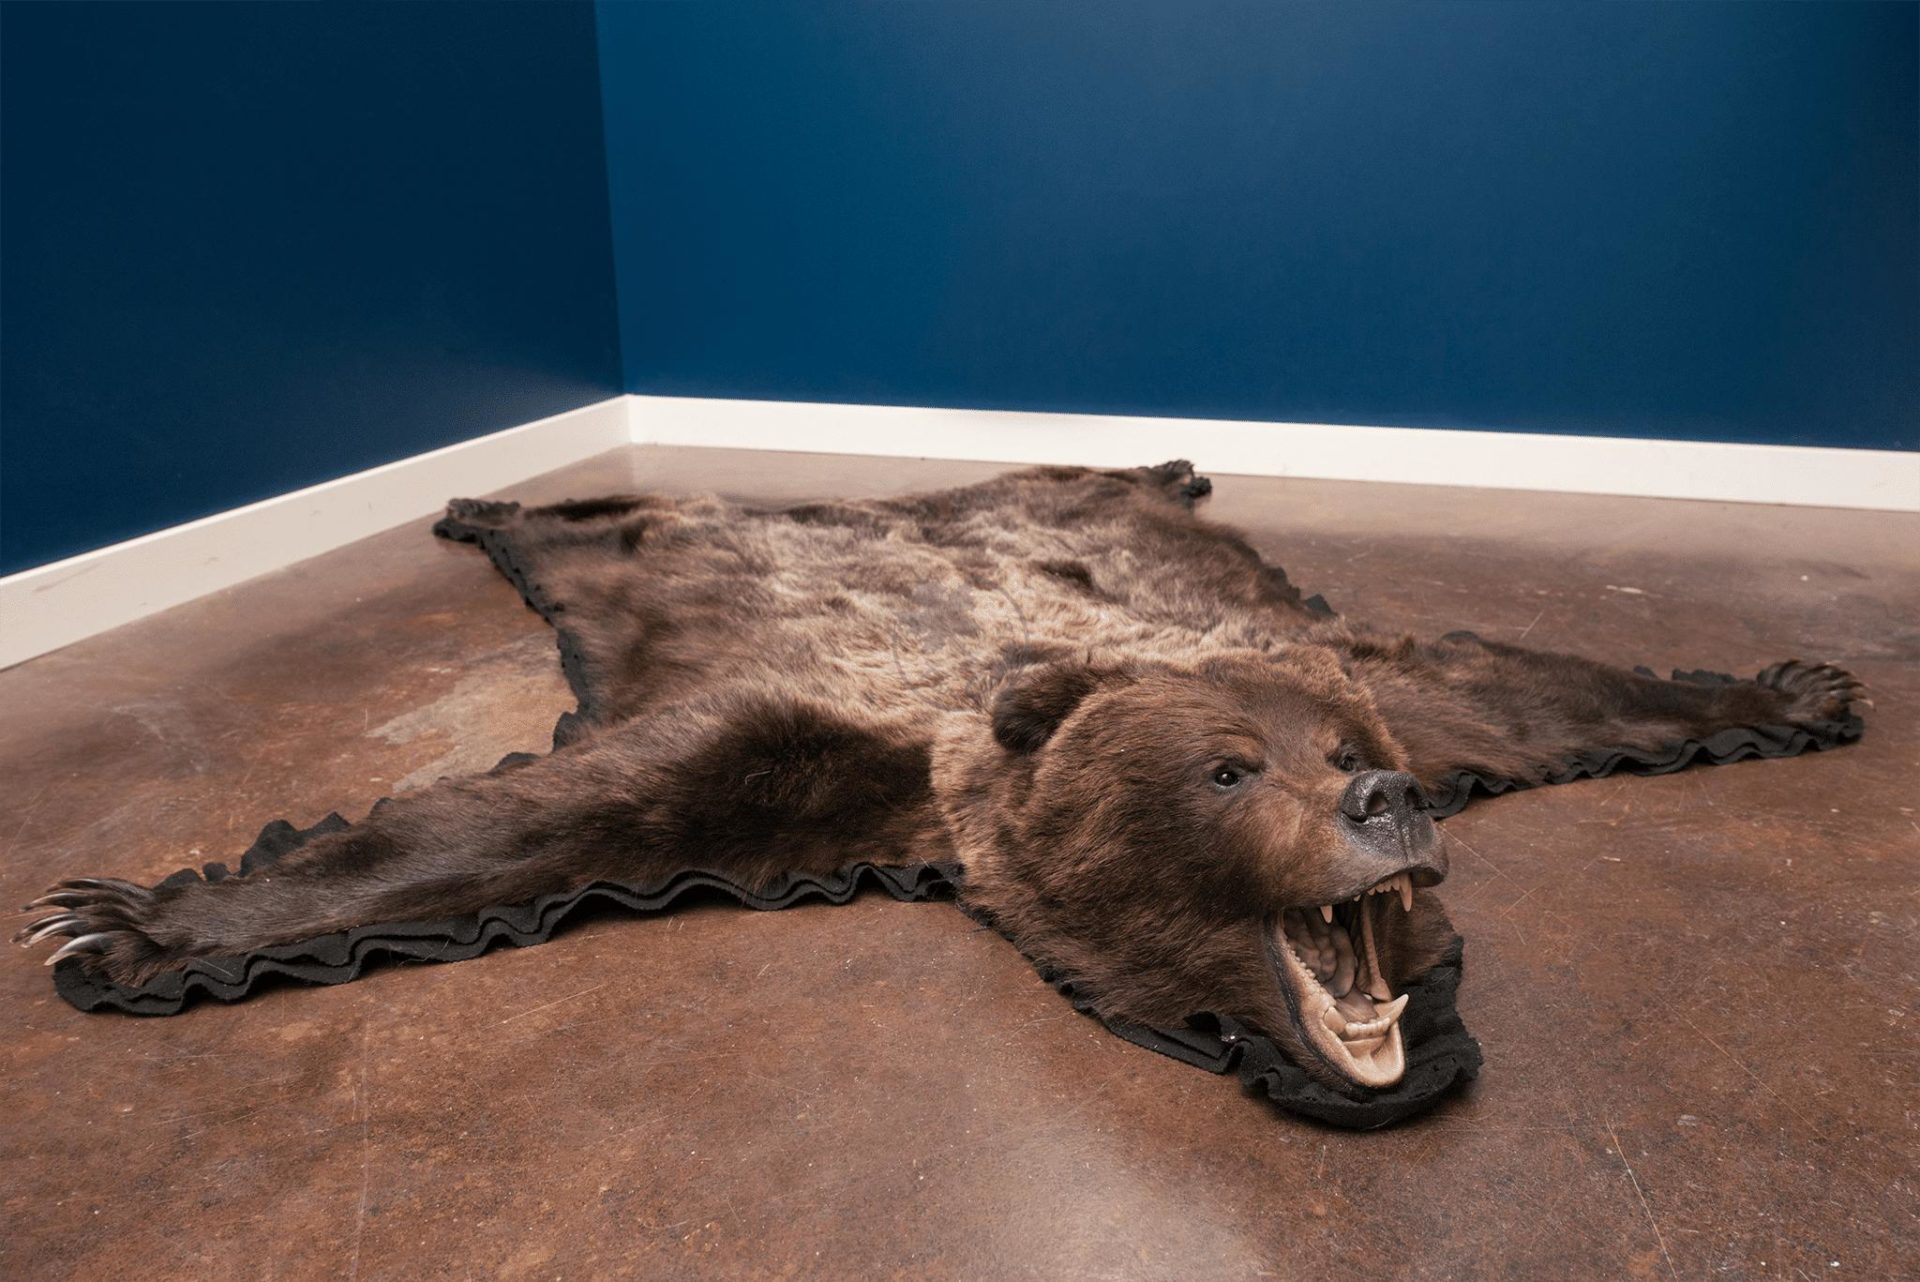 Grizzly Bear Skin Rugs Furcanada, How To Tell If A Bear Skin Rug Is Real